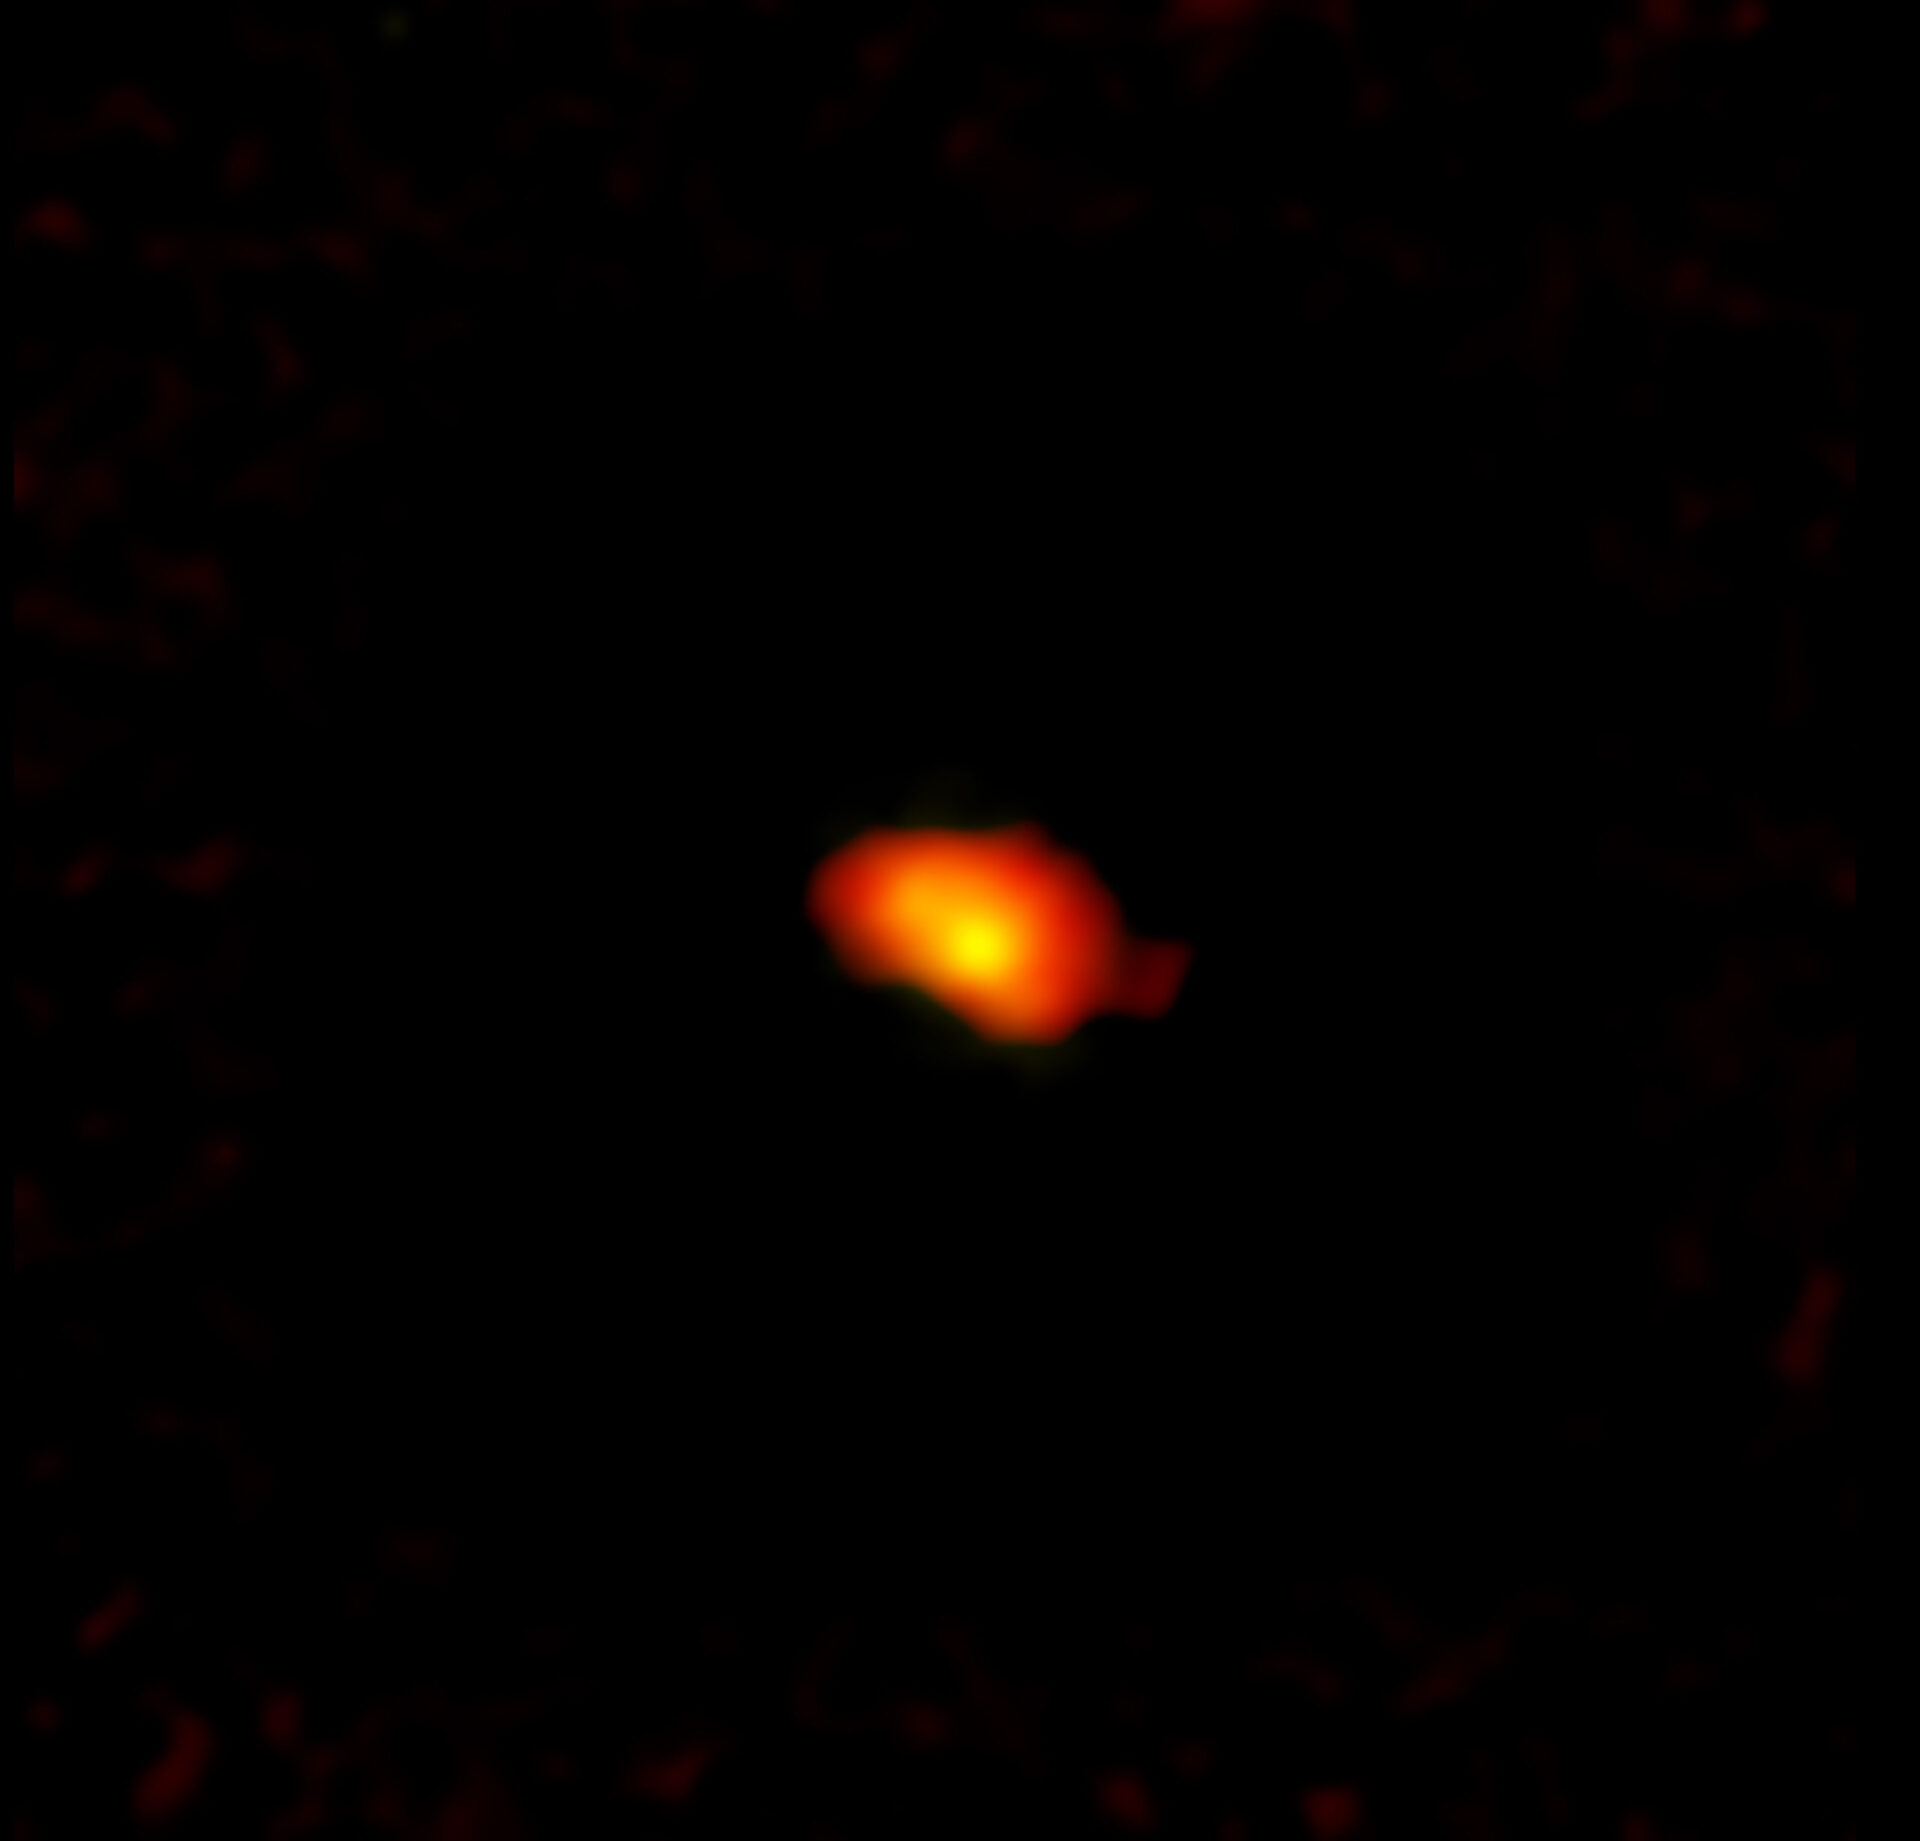 <p>A1689-zD1 is a star-forming galaxy located in the Virgo constellation cluster. It was first observed thanks to gravitational lensing from the Abell 1689 galaxy, which made the young galaxy appear nine times more luminous. New observations made using the Atacama Large Millimeter/submillimeter Array (ALMA) are revealing to scientists that the young galaxy, and others like it, may be bigger and more complex than originally thought. Credit: ALMA (ESO/NAOJ/NRAO)/H. Akins (Grinnell College), B. Saxton (NRAO/AUI/NSF)</p>
